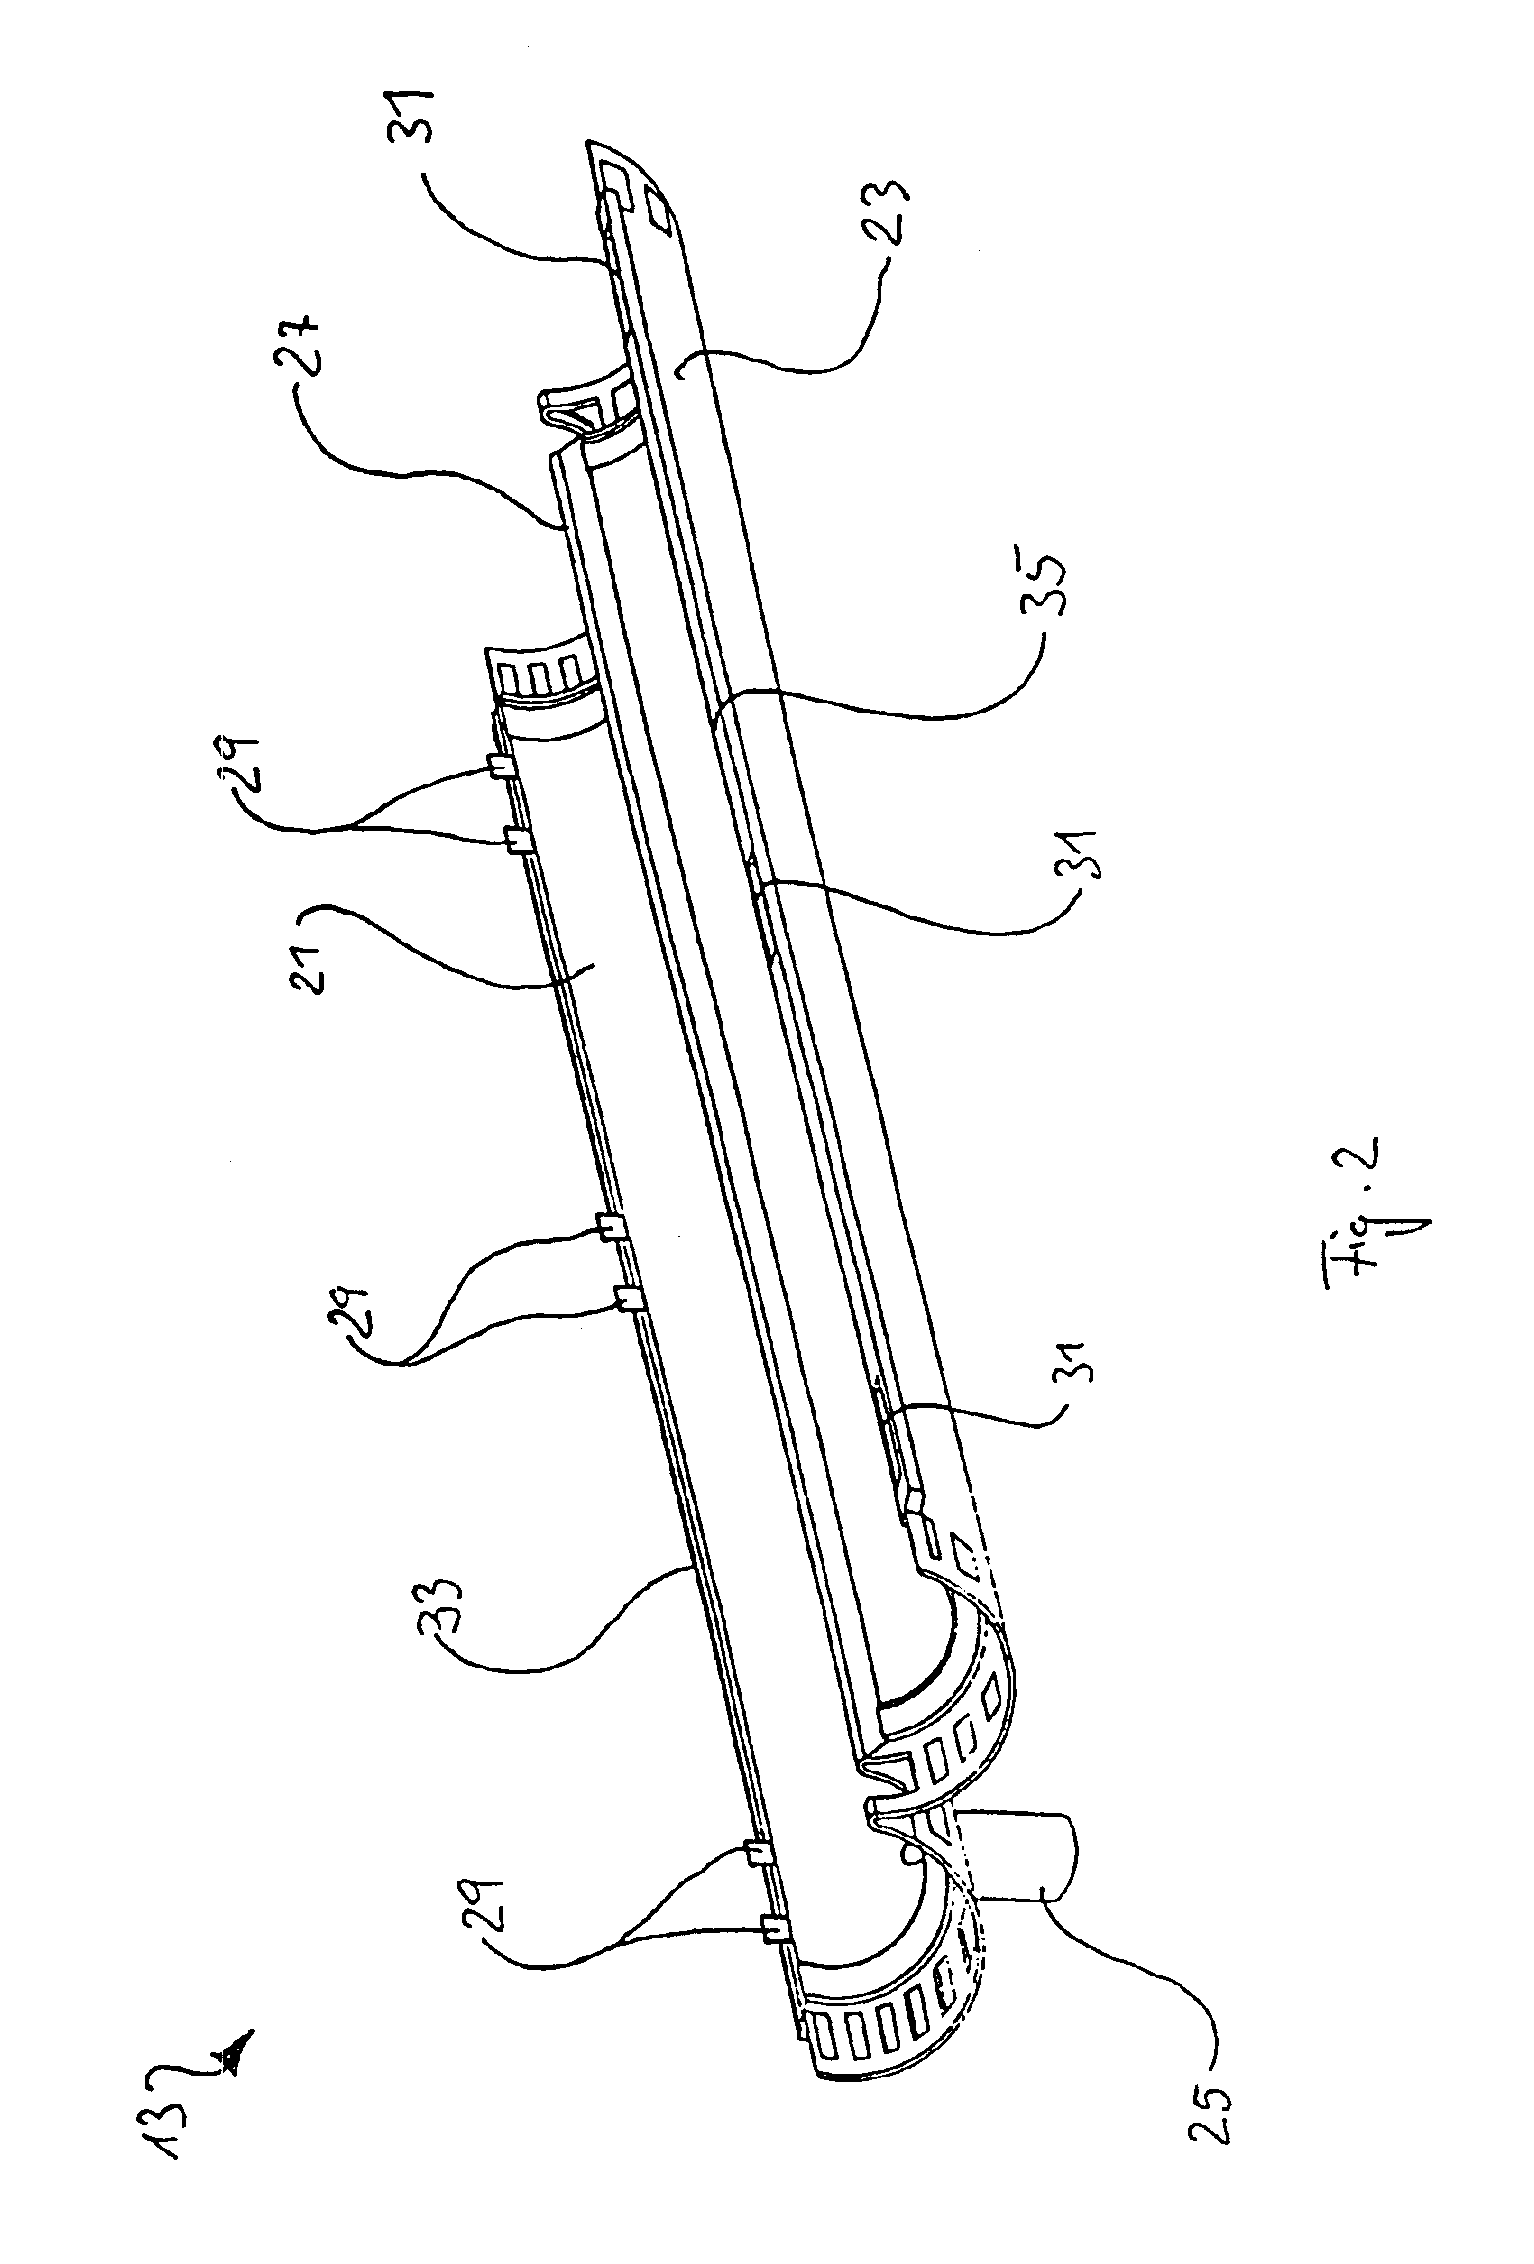 Filters and method for producing filters